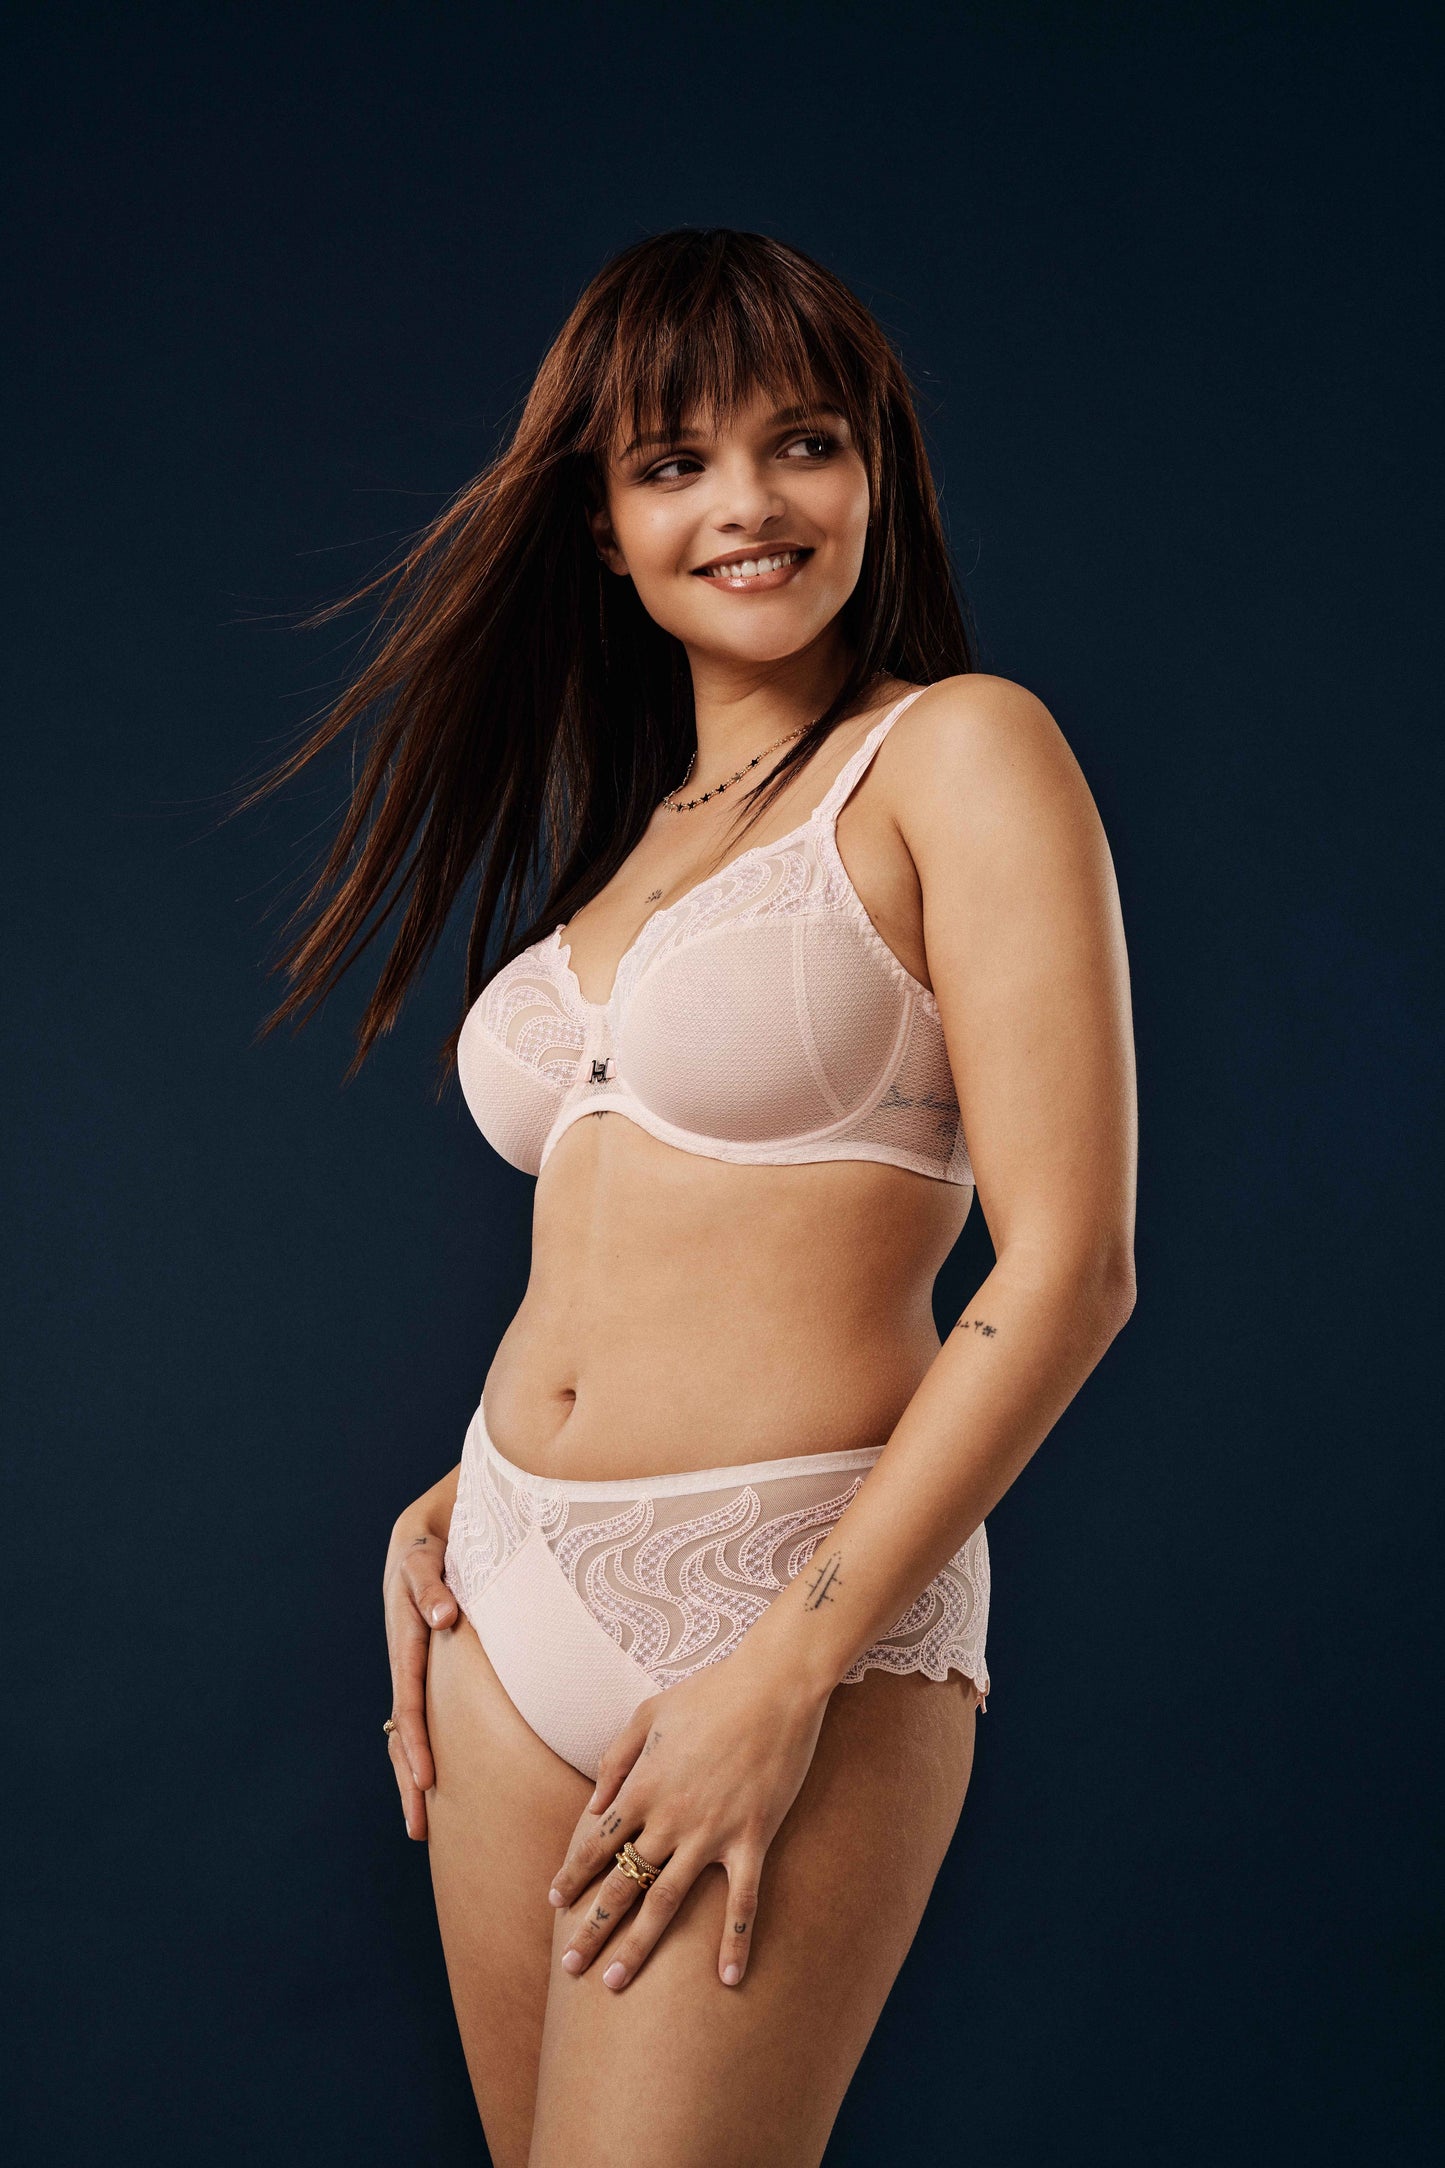 Moonlight Full Cup Bra By Louisa Bracq - 30-46 bands, B-I cups (EURO sizing)